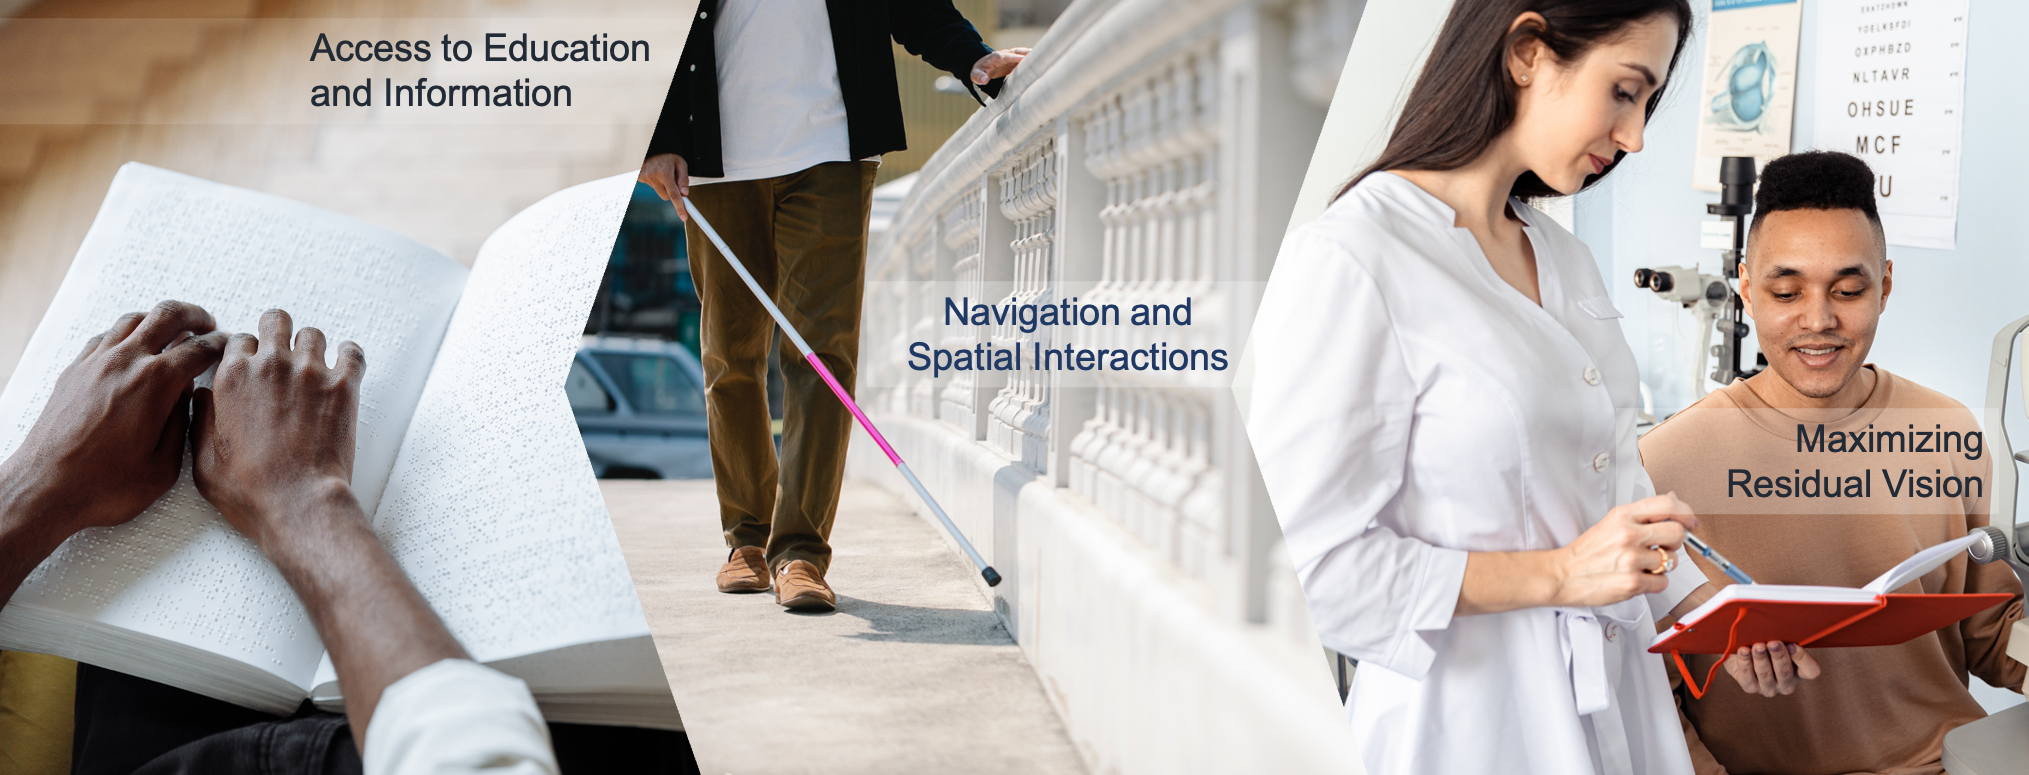 photos of hands reading Braille, man on a side walk with a white cane, patient & healthcare provider in an ophthalmology office. Respective labels: Access to Education & Information, Navigation & Spatial Interactions, Maximizing Residual Vision